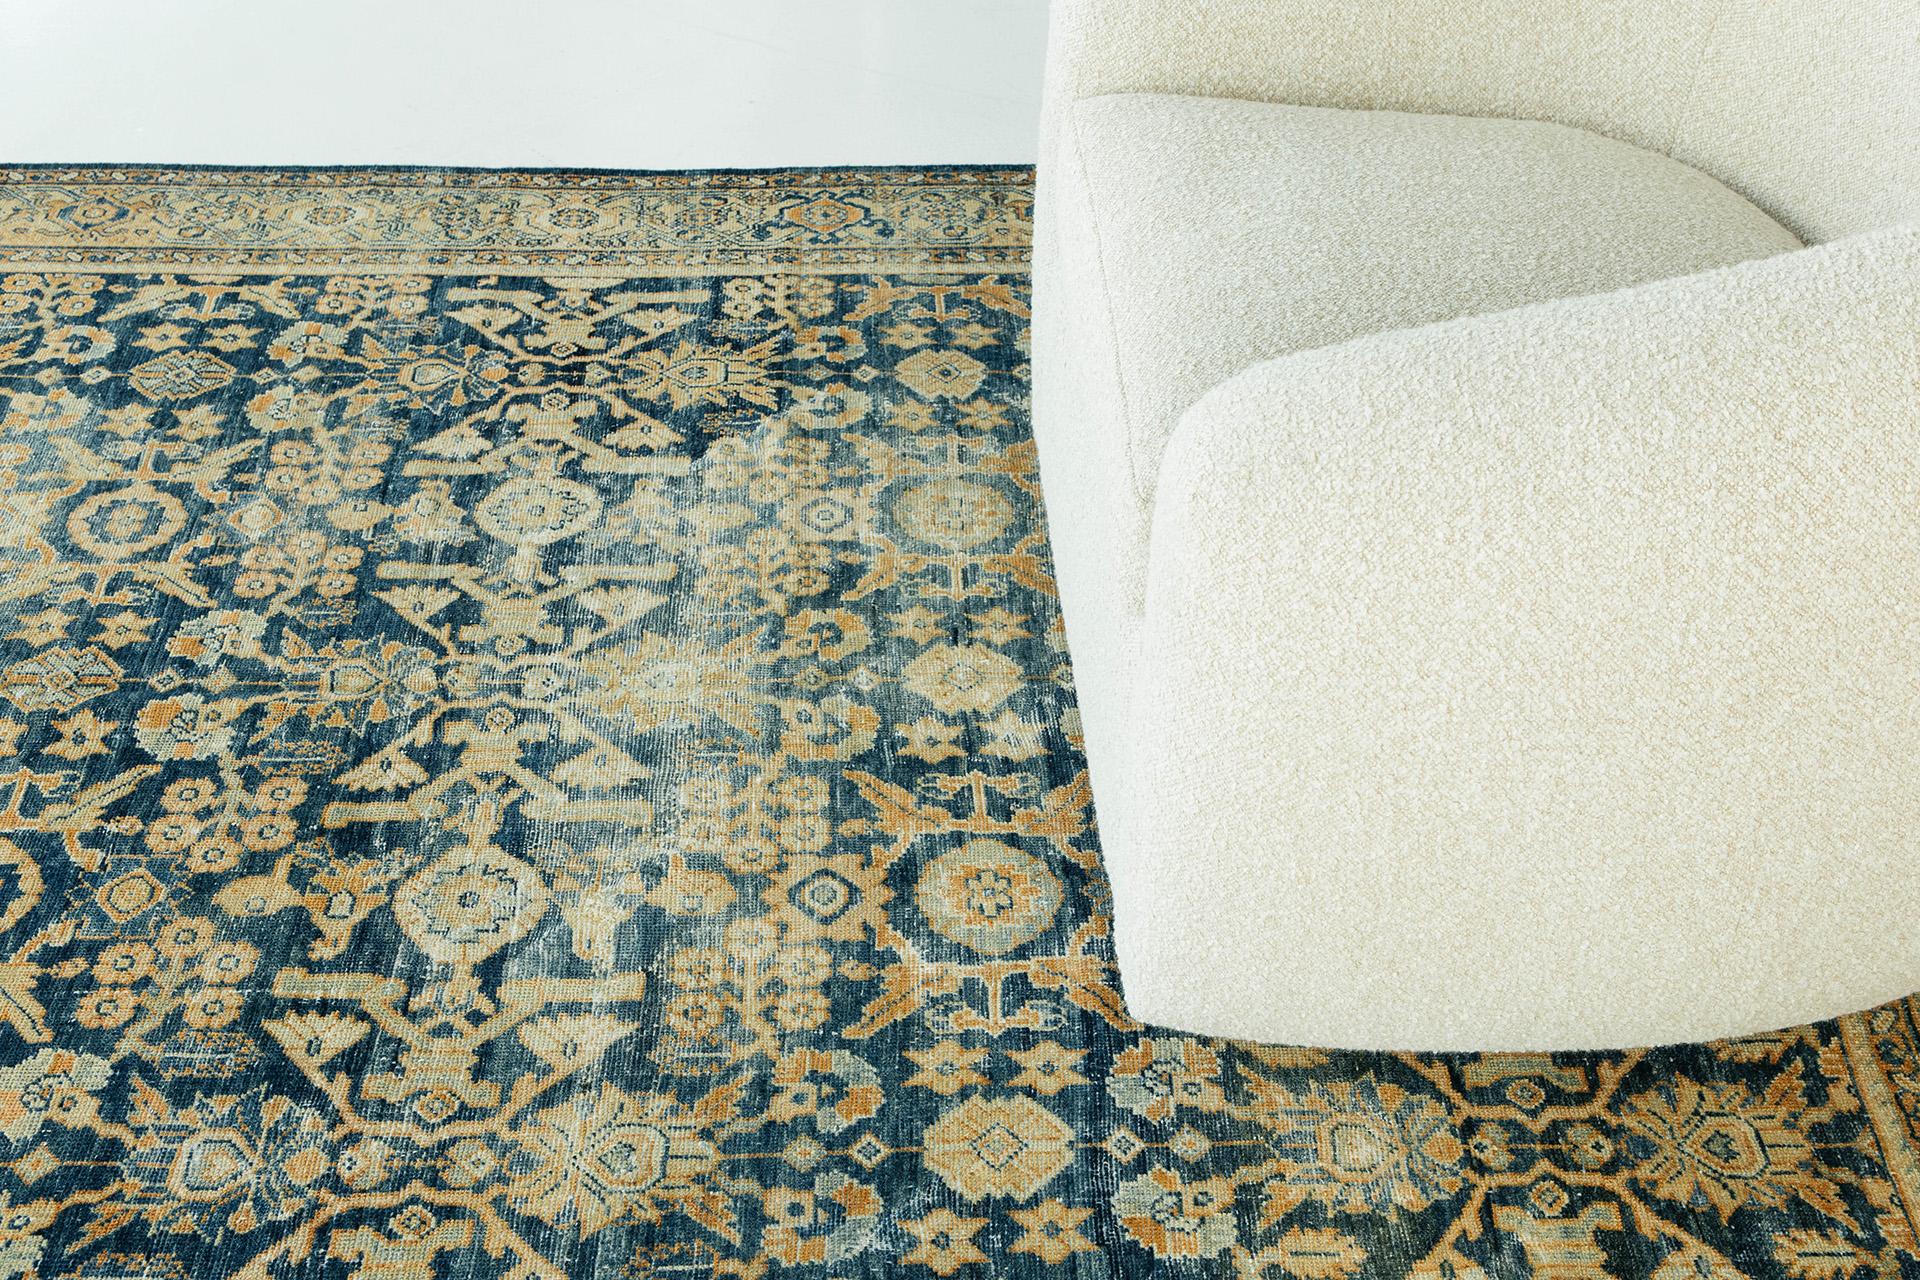 Deep indigo Abrash ground with all-over motif of interlocking geometricized palmettes and florals in apricot, blue and cream tones. The field pattern is organized in rows and columns. The border features palmettes and vine elements.

Rug number: